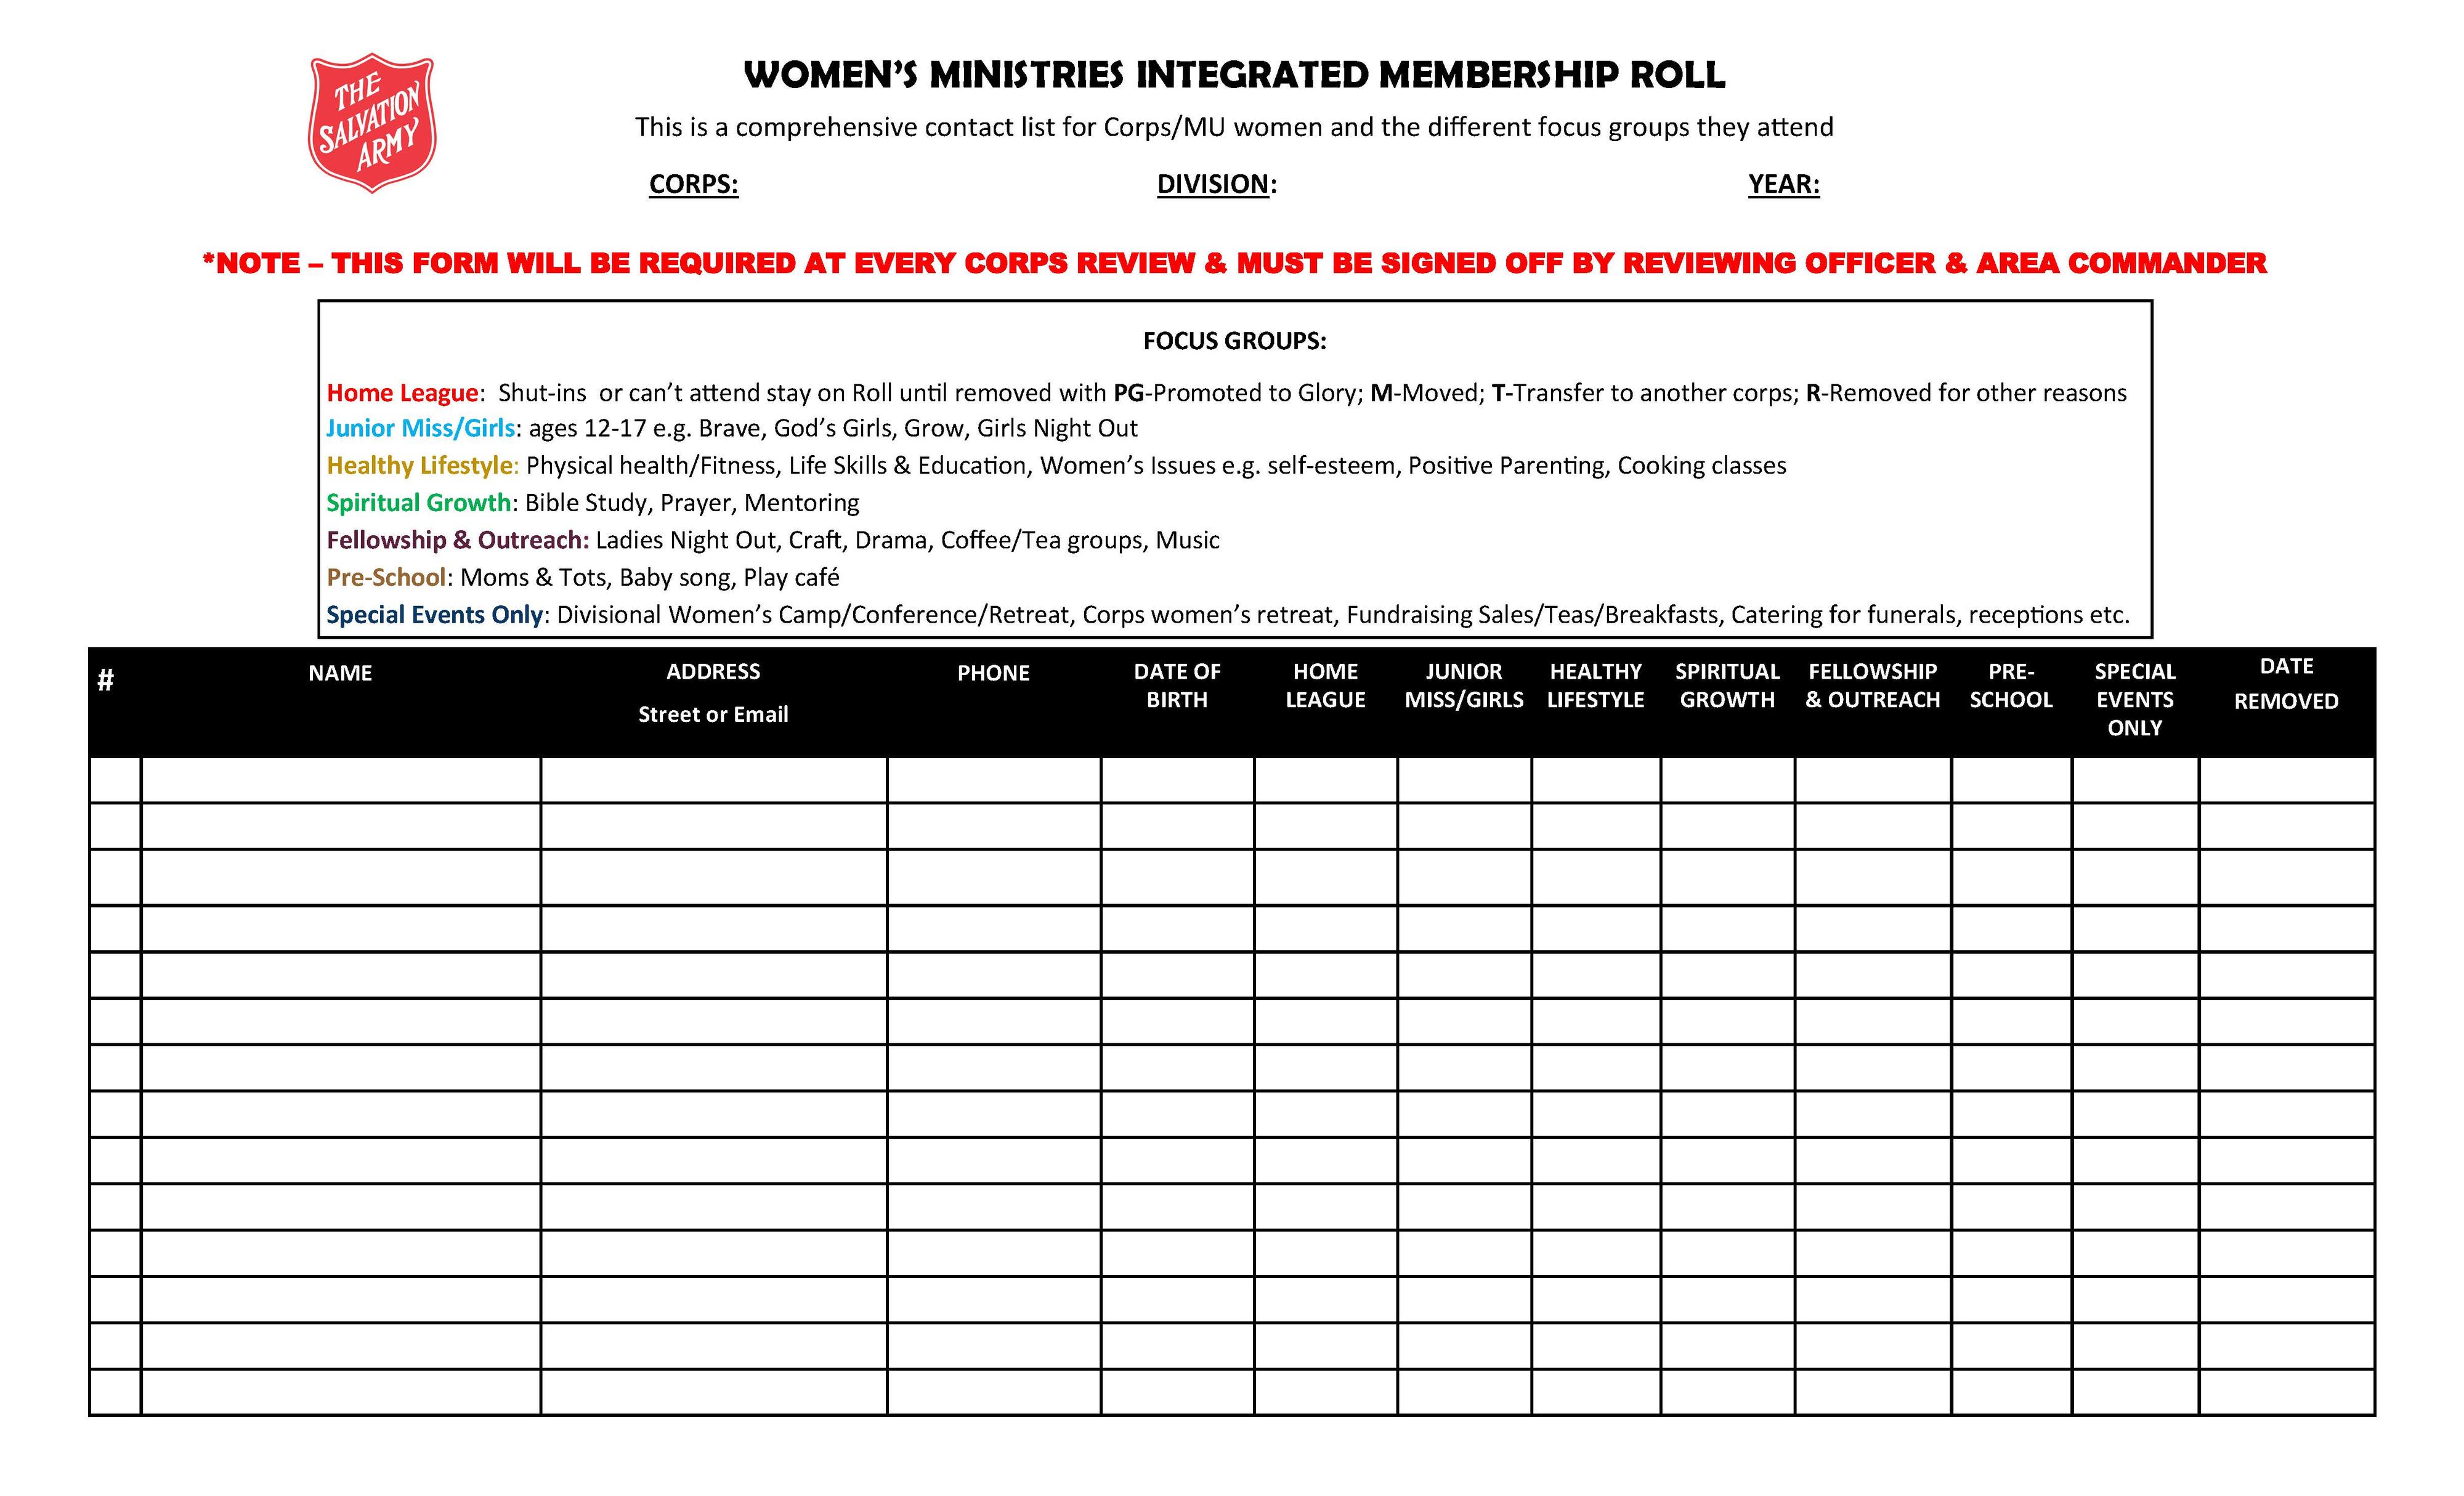 Women's Ministries Integrated Membership Form